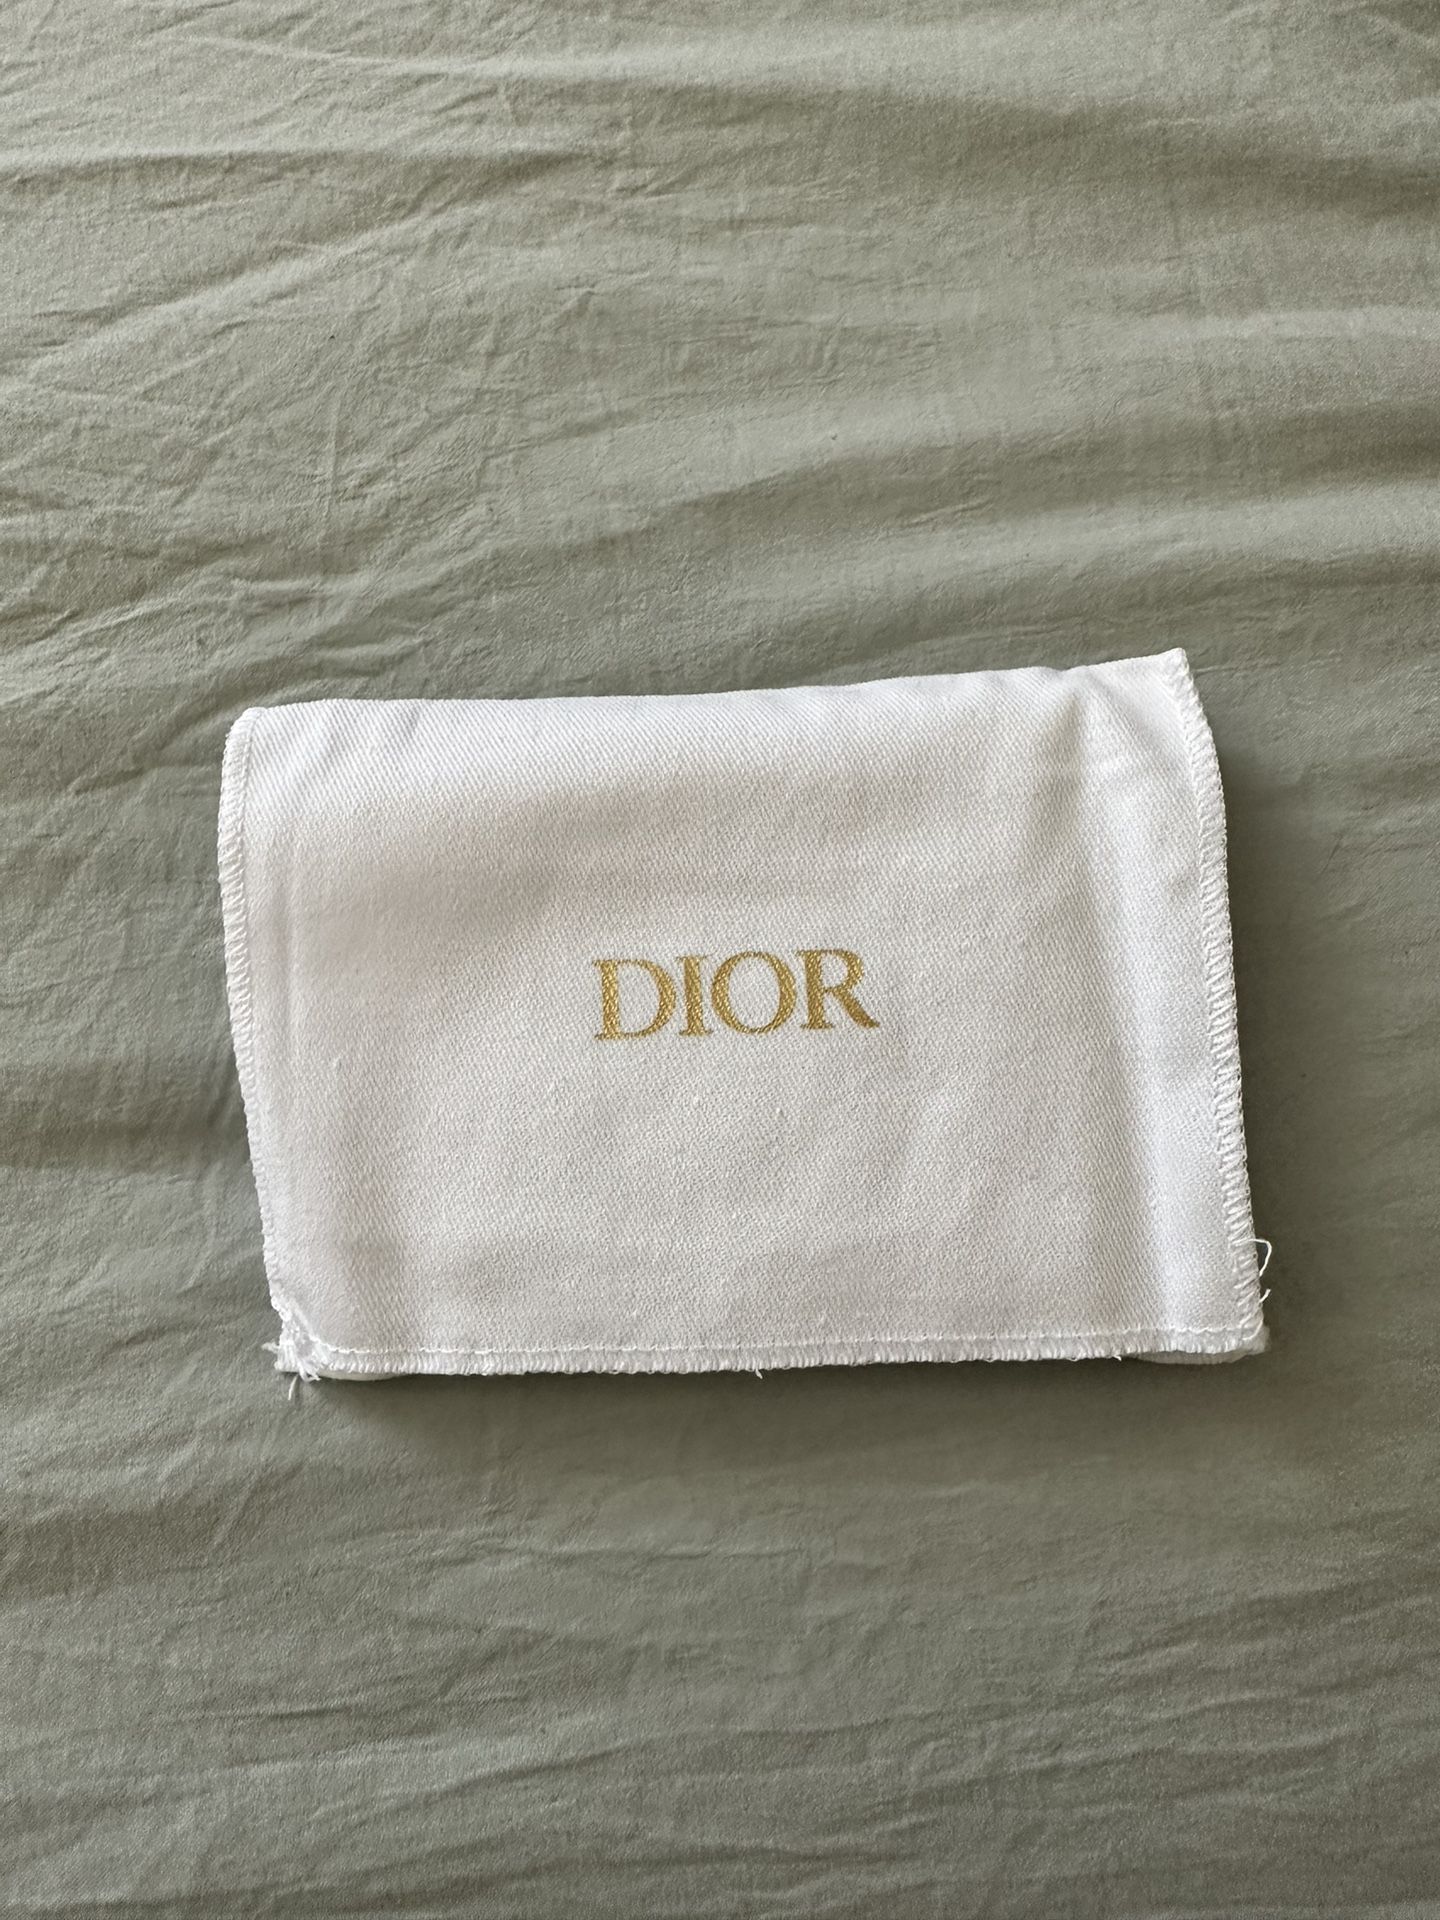 Dior Business Card Holder for Sale in Los Angeles, CA - OfferUp